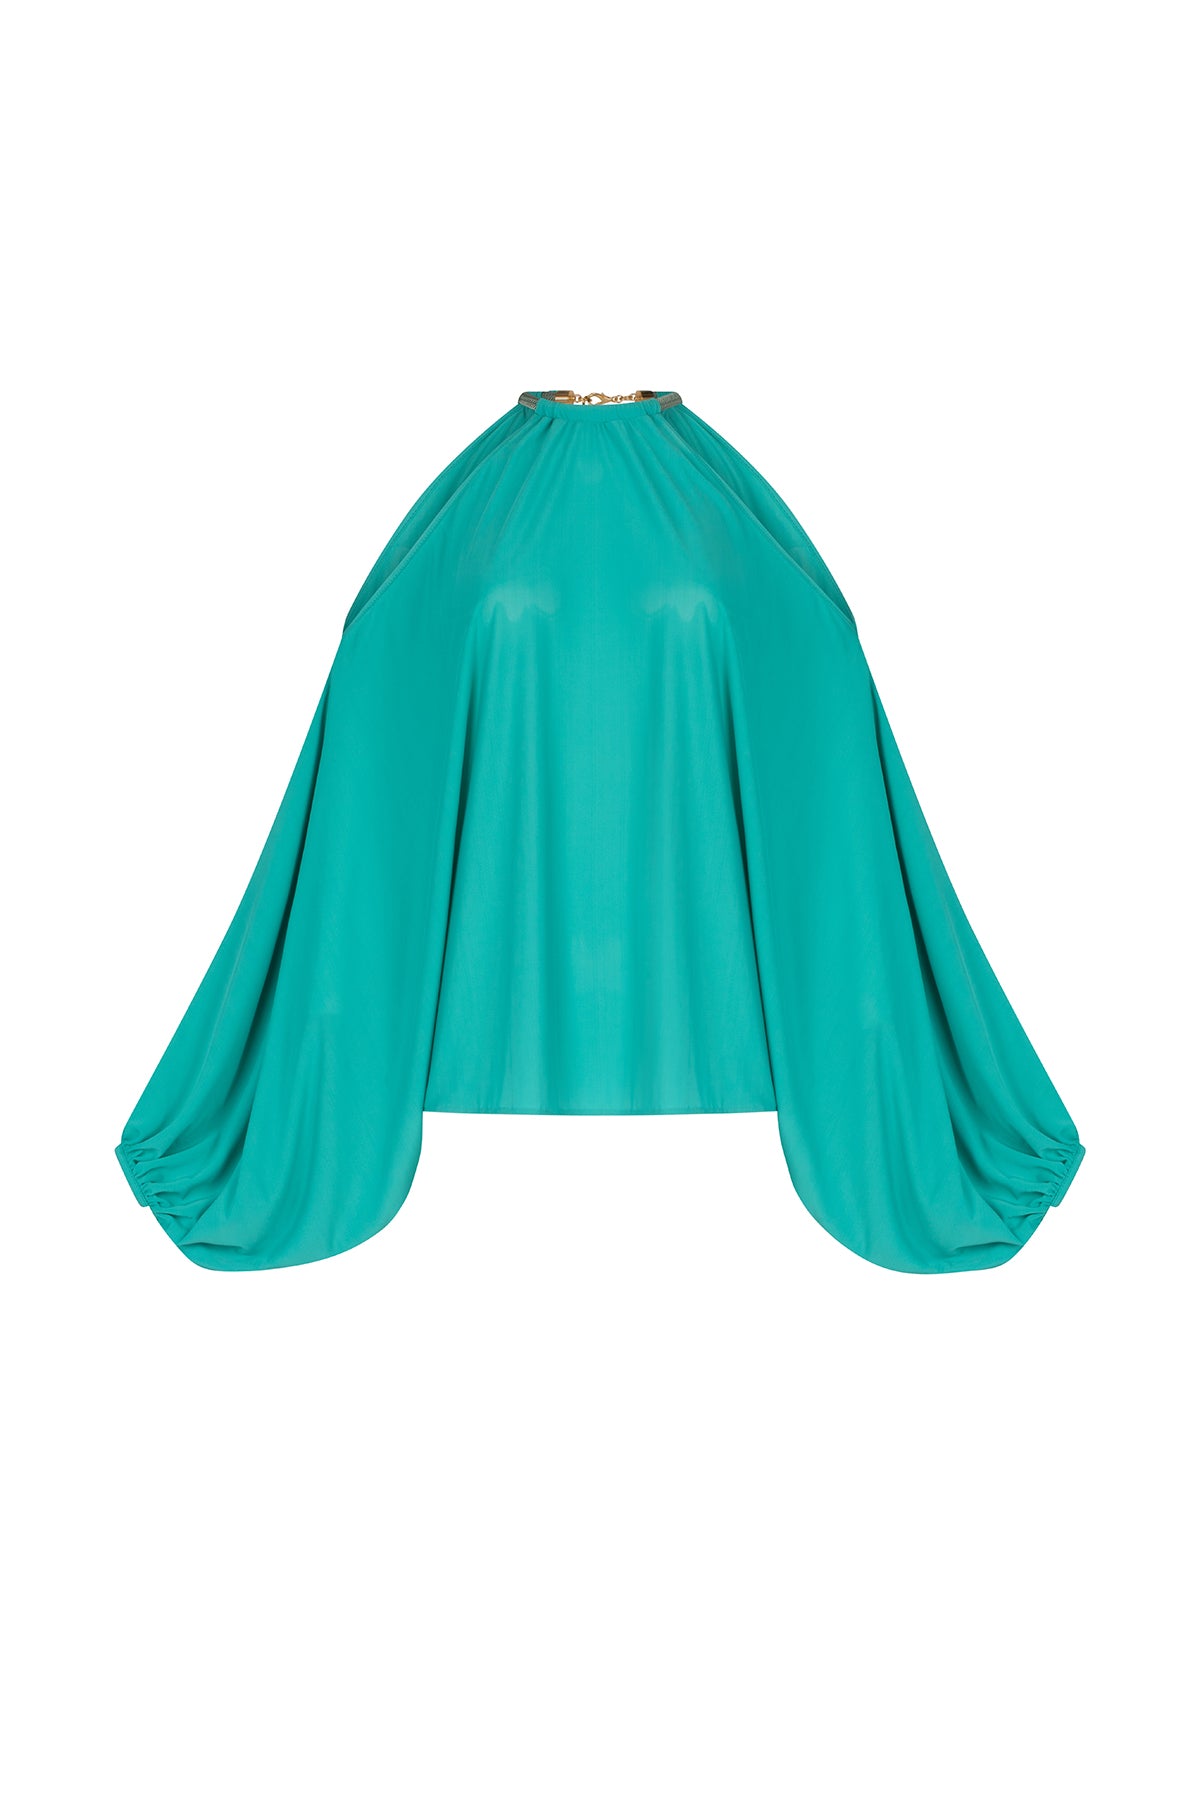 A Janina Blouse Aqua with a metallic jewelry detail around the neck.